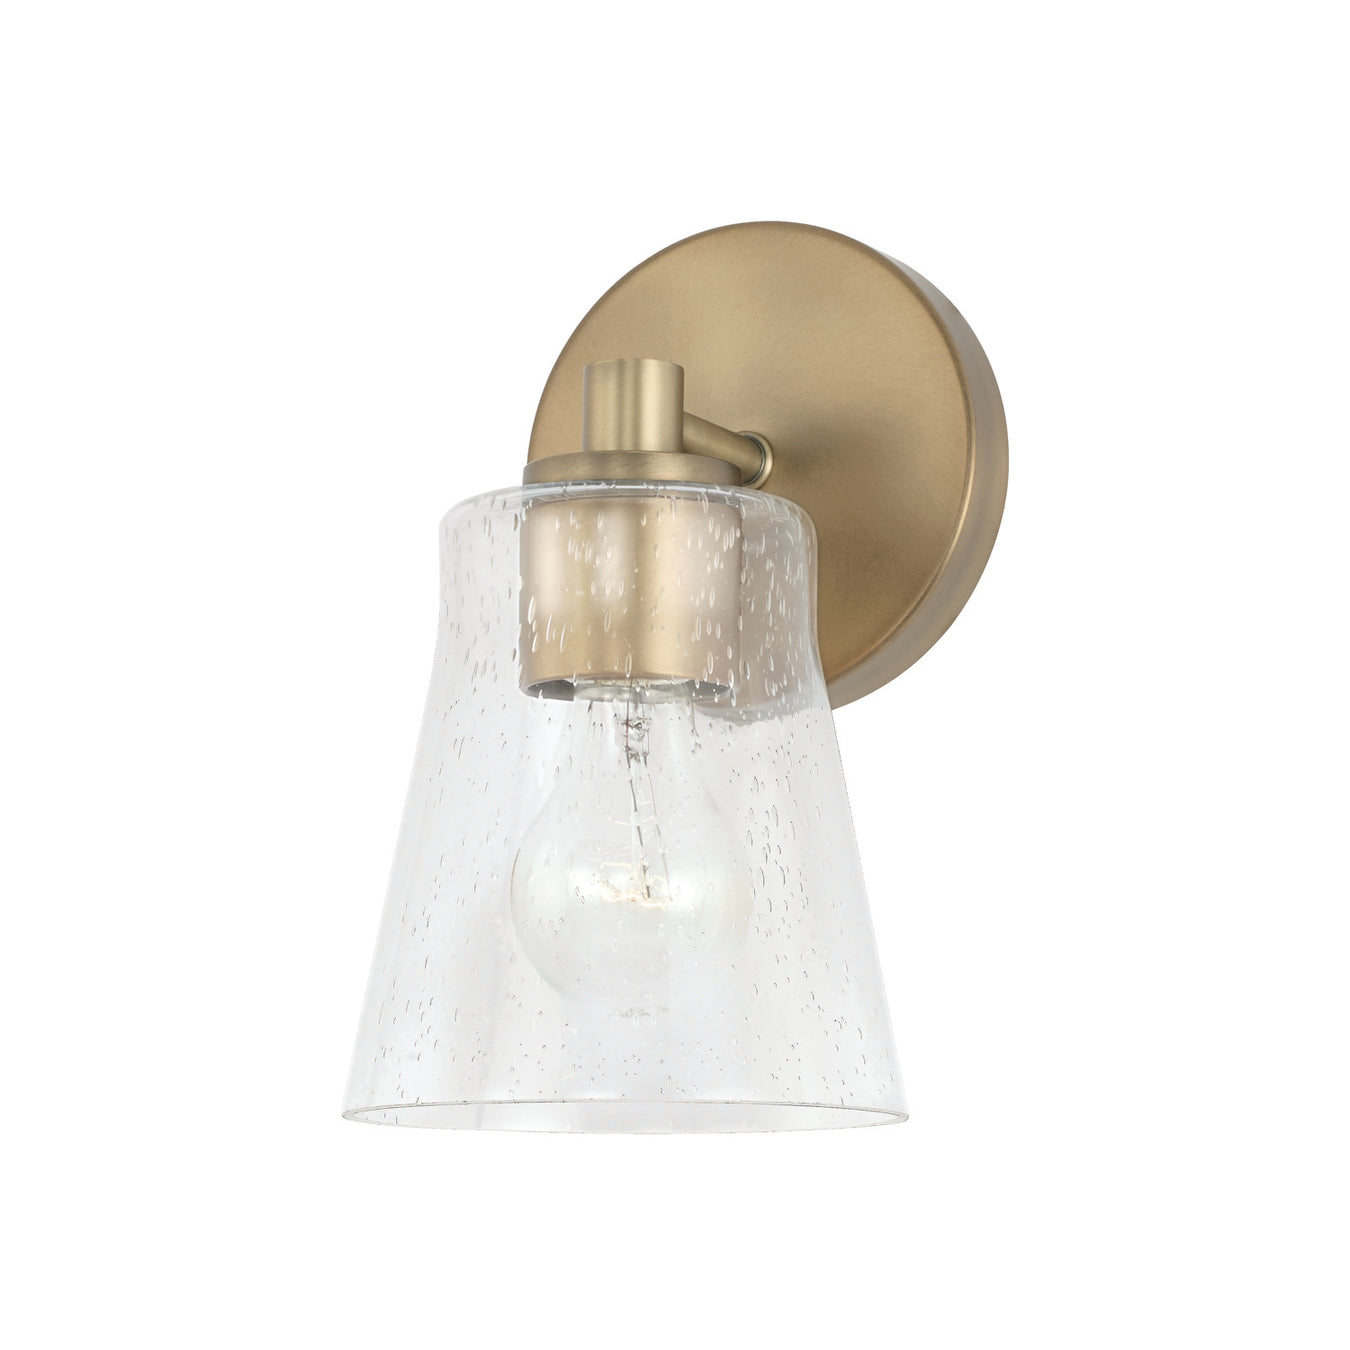 Baker One Light Wall Sconce in Aged Brass